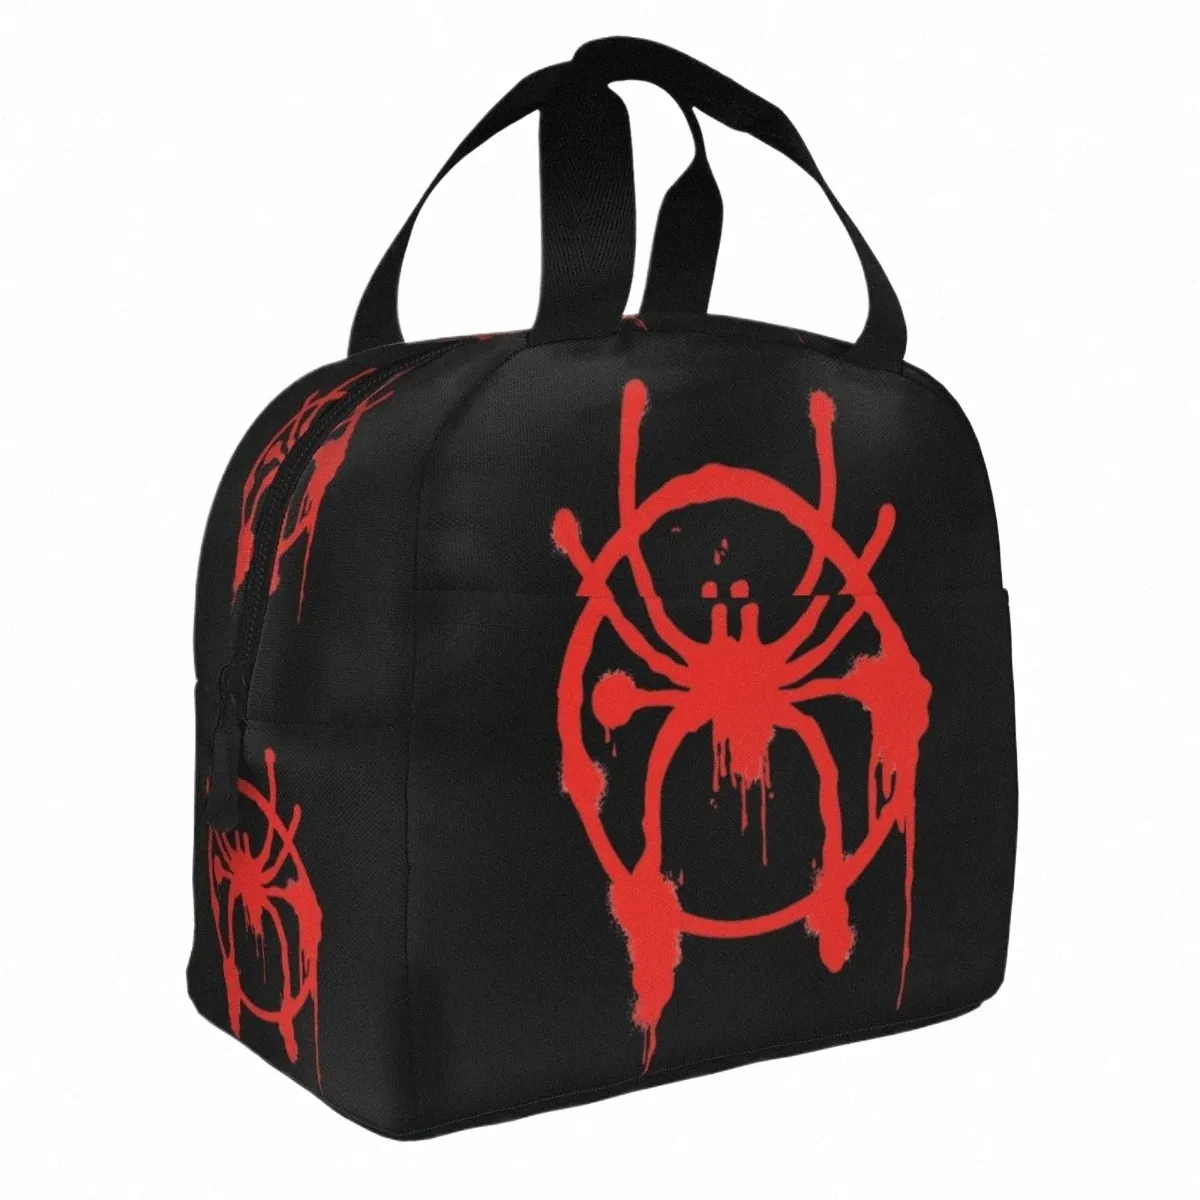 SPIDER LOGO SPIDER Web Sac à lunch isolé Sac Thermal Meal Consulter Portable Tote Box Lann Men Femmes Travail Travel 82U8 #